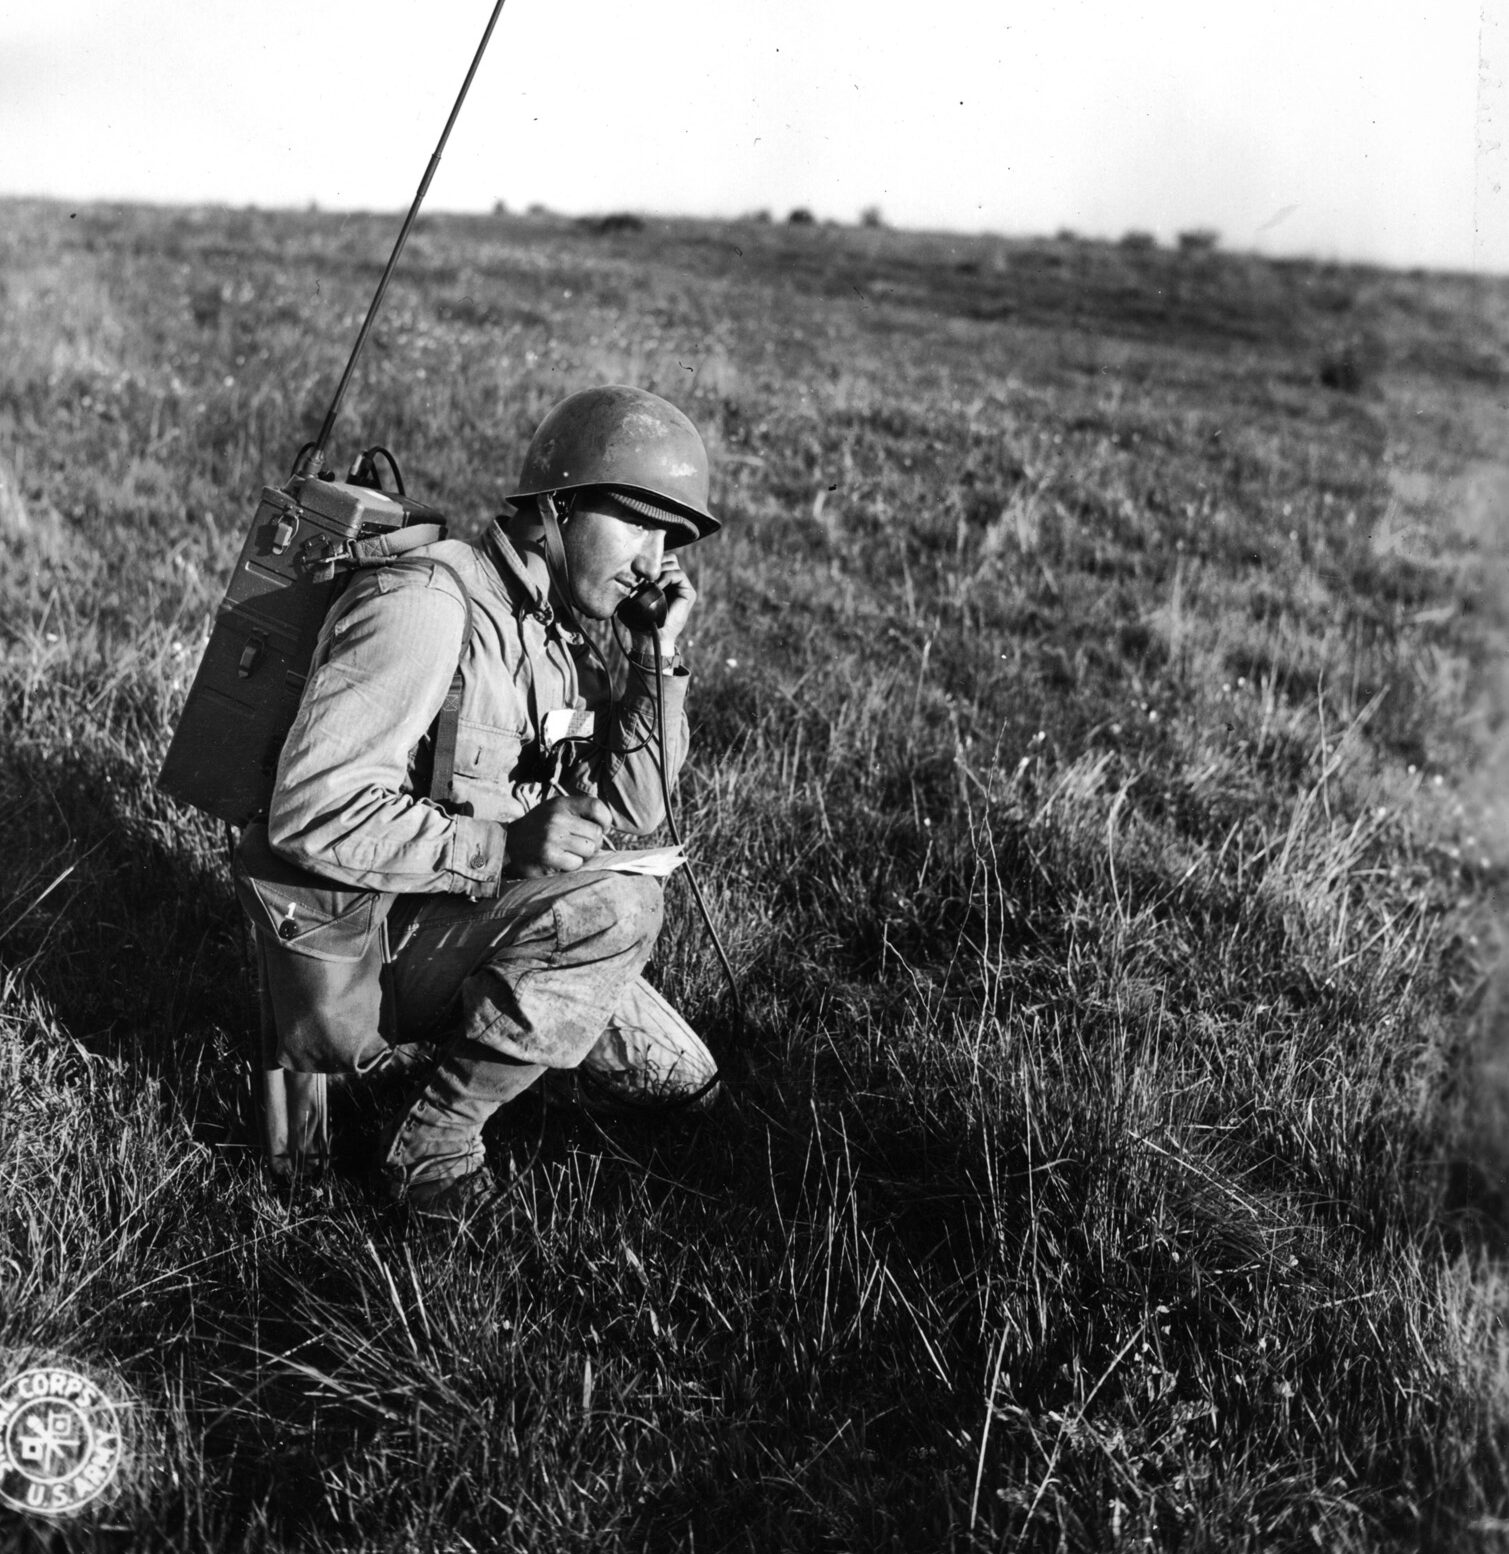 A soldier trains with an SCR 300 radio set, including a talking apparatus and a heavy backpack. The SCR 300 had a range of up to three miles, operating on FM (frequency modulation) and becoming the world’s first true ‘Walkie Talkie.’